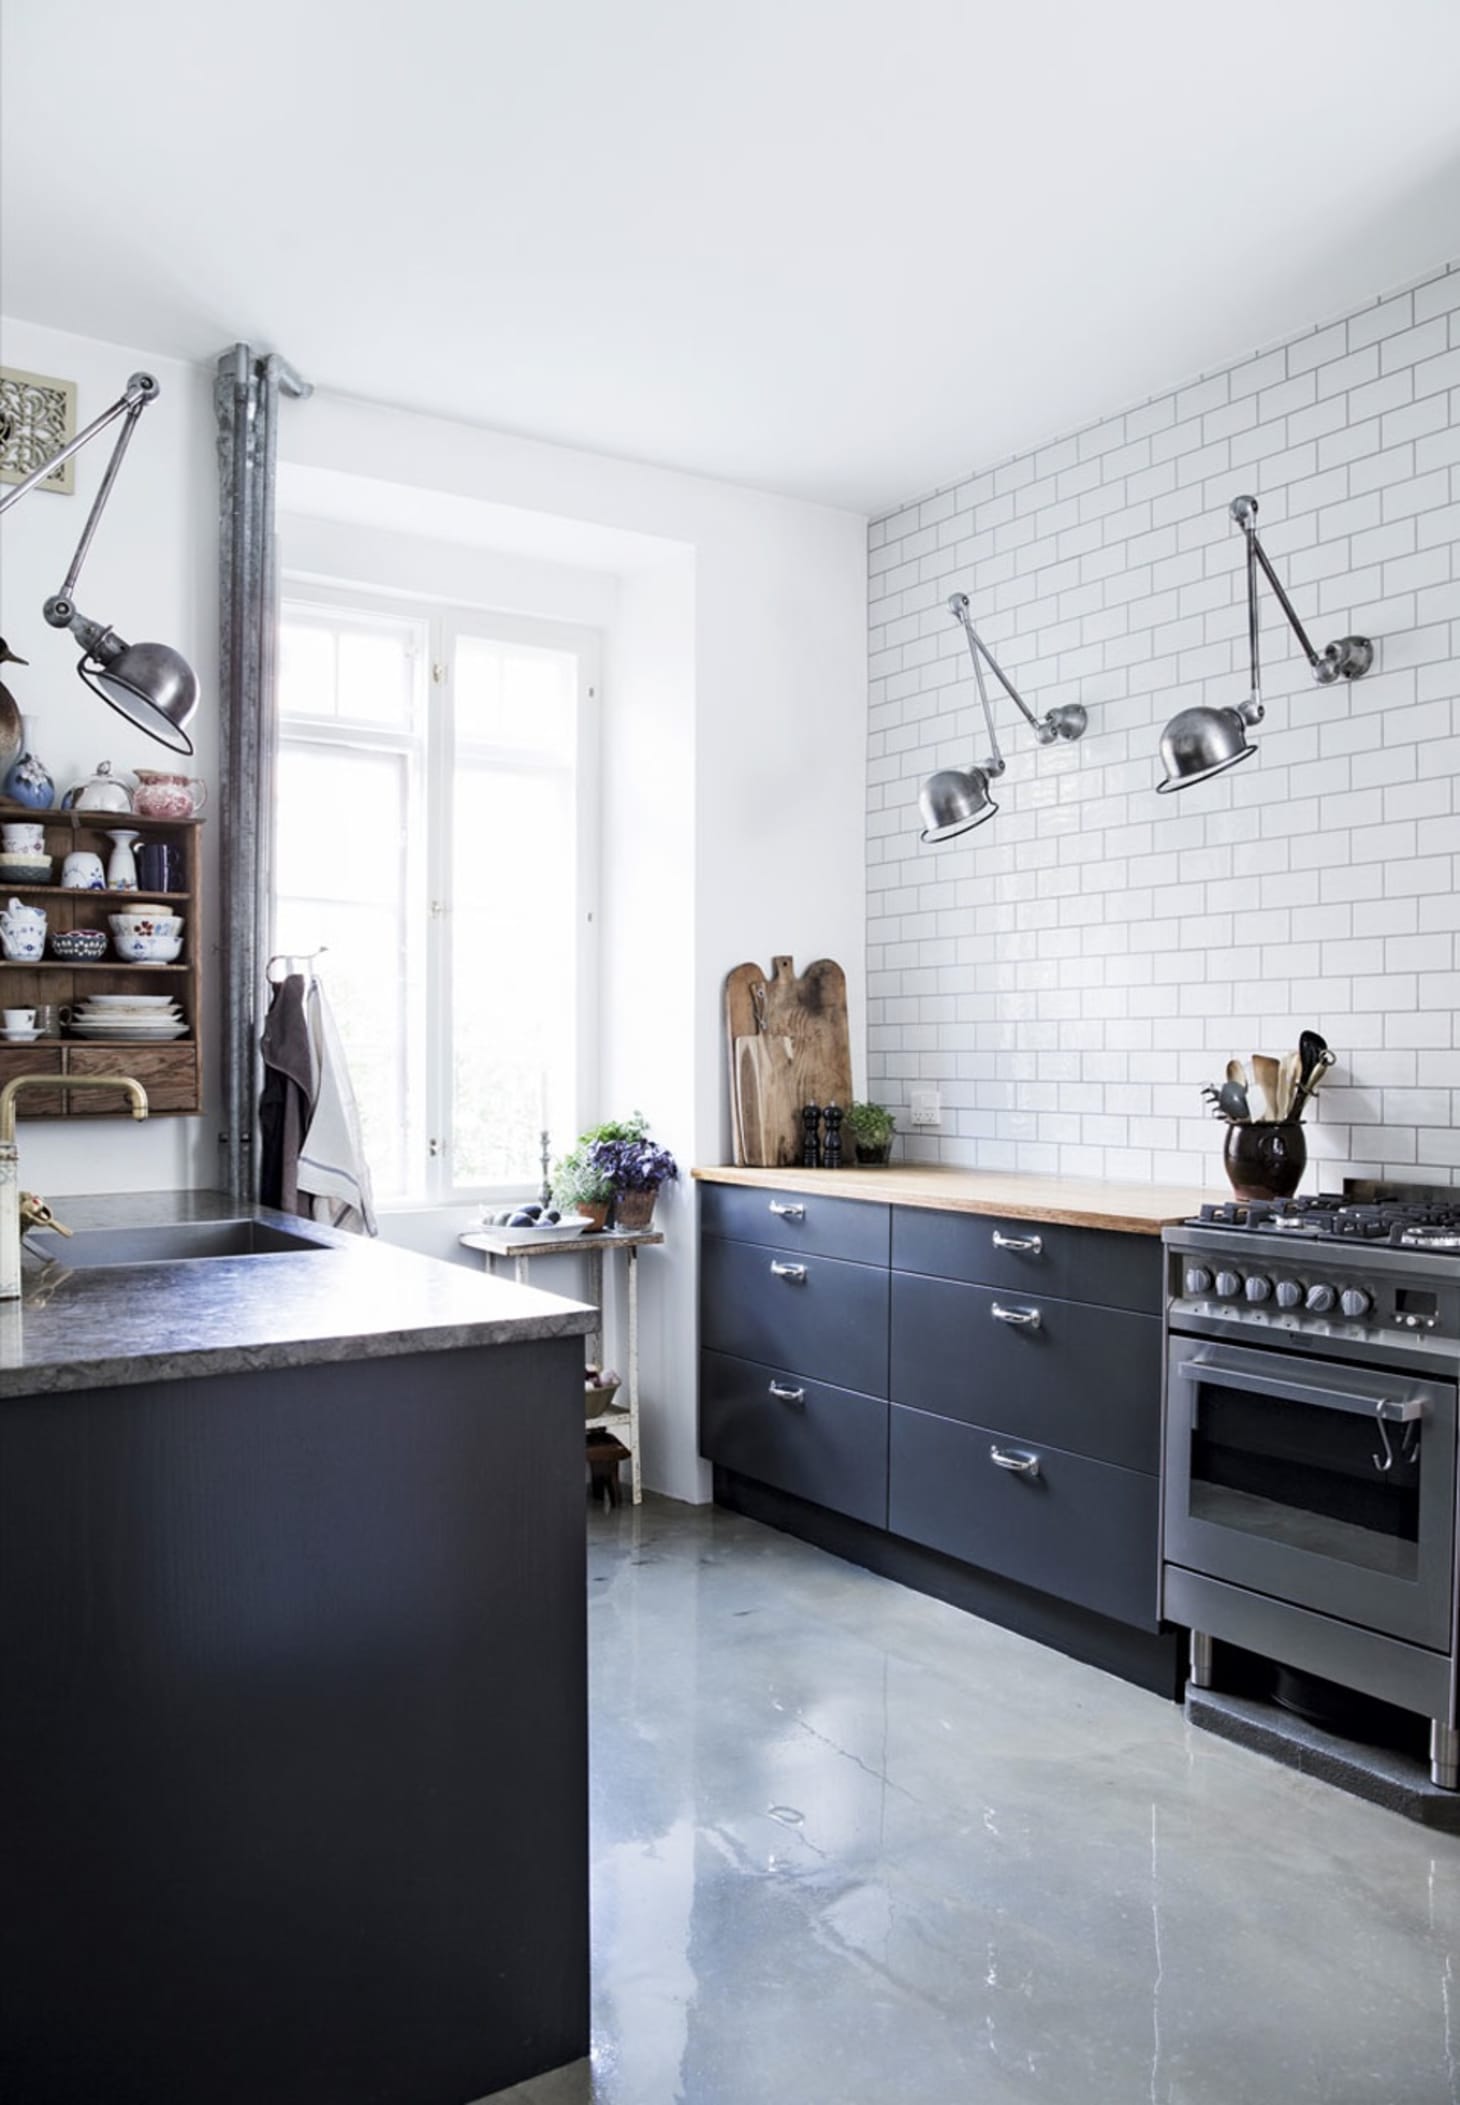 Kitchens Without Upper Cabinets Should You Go Without